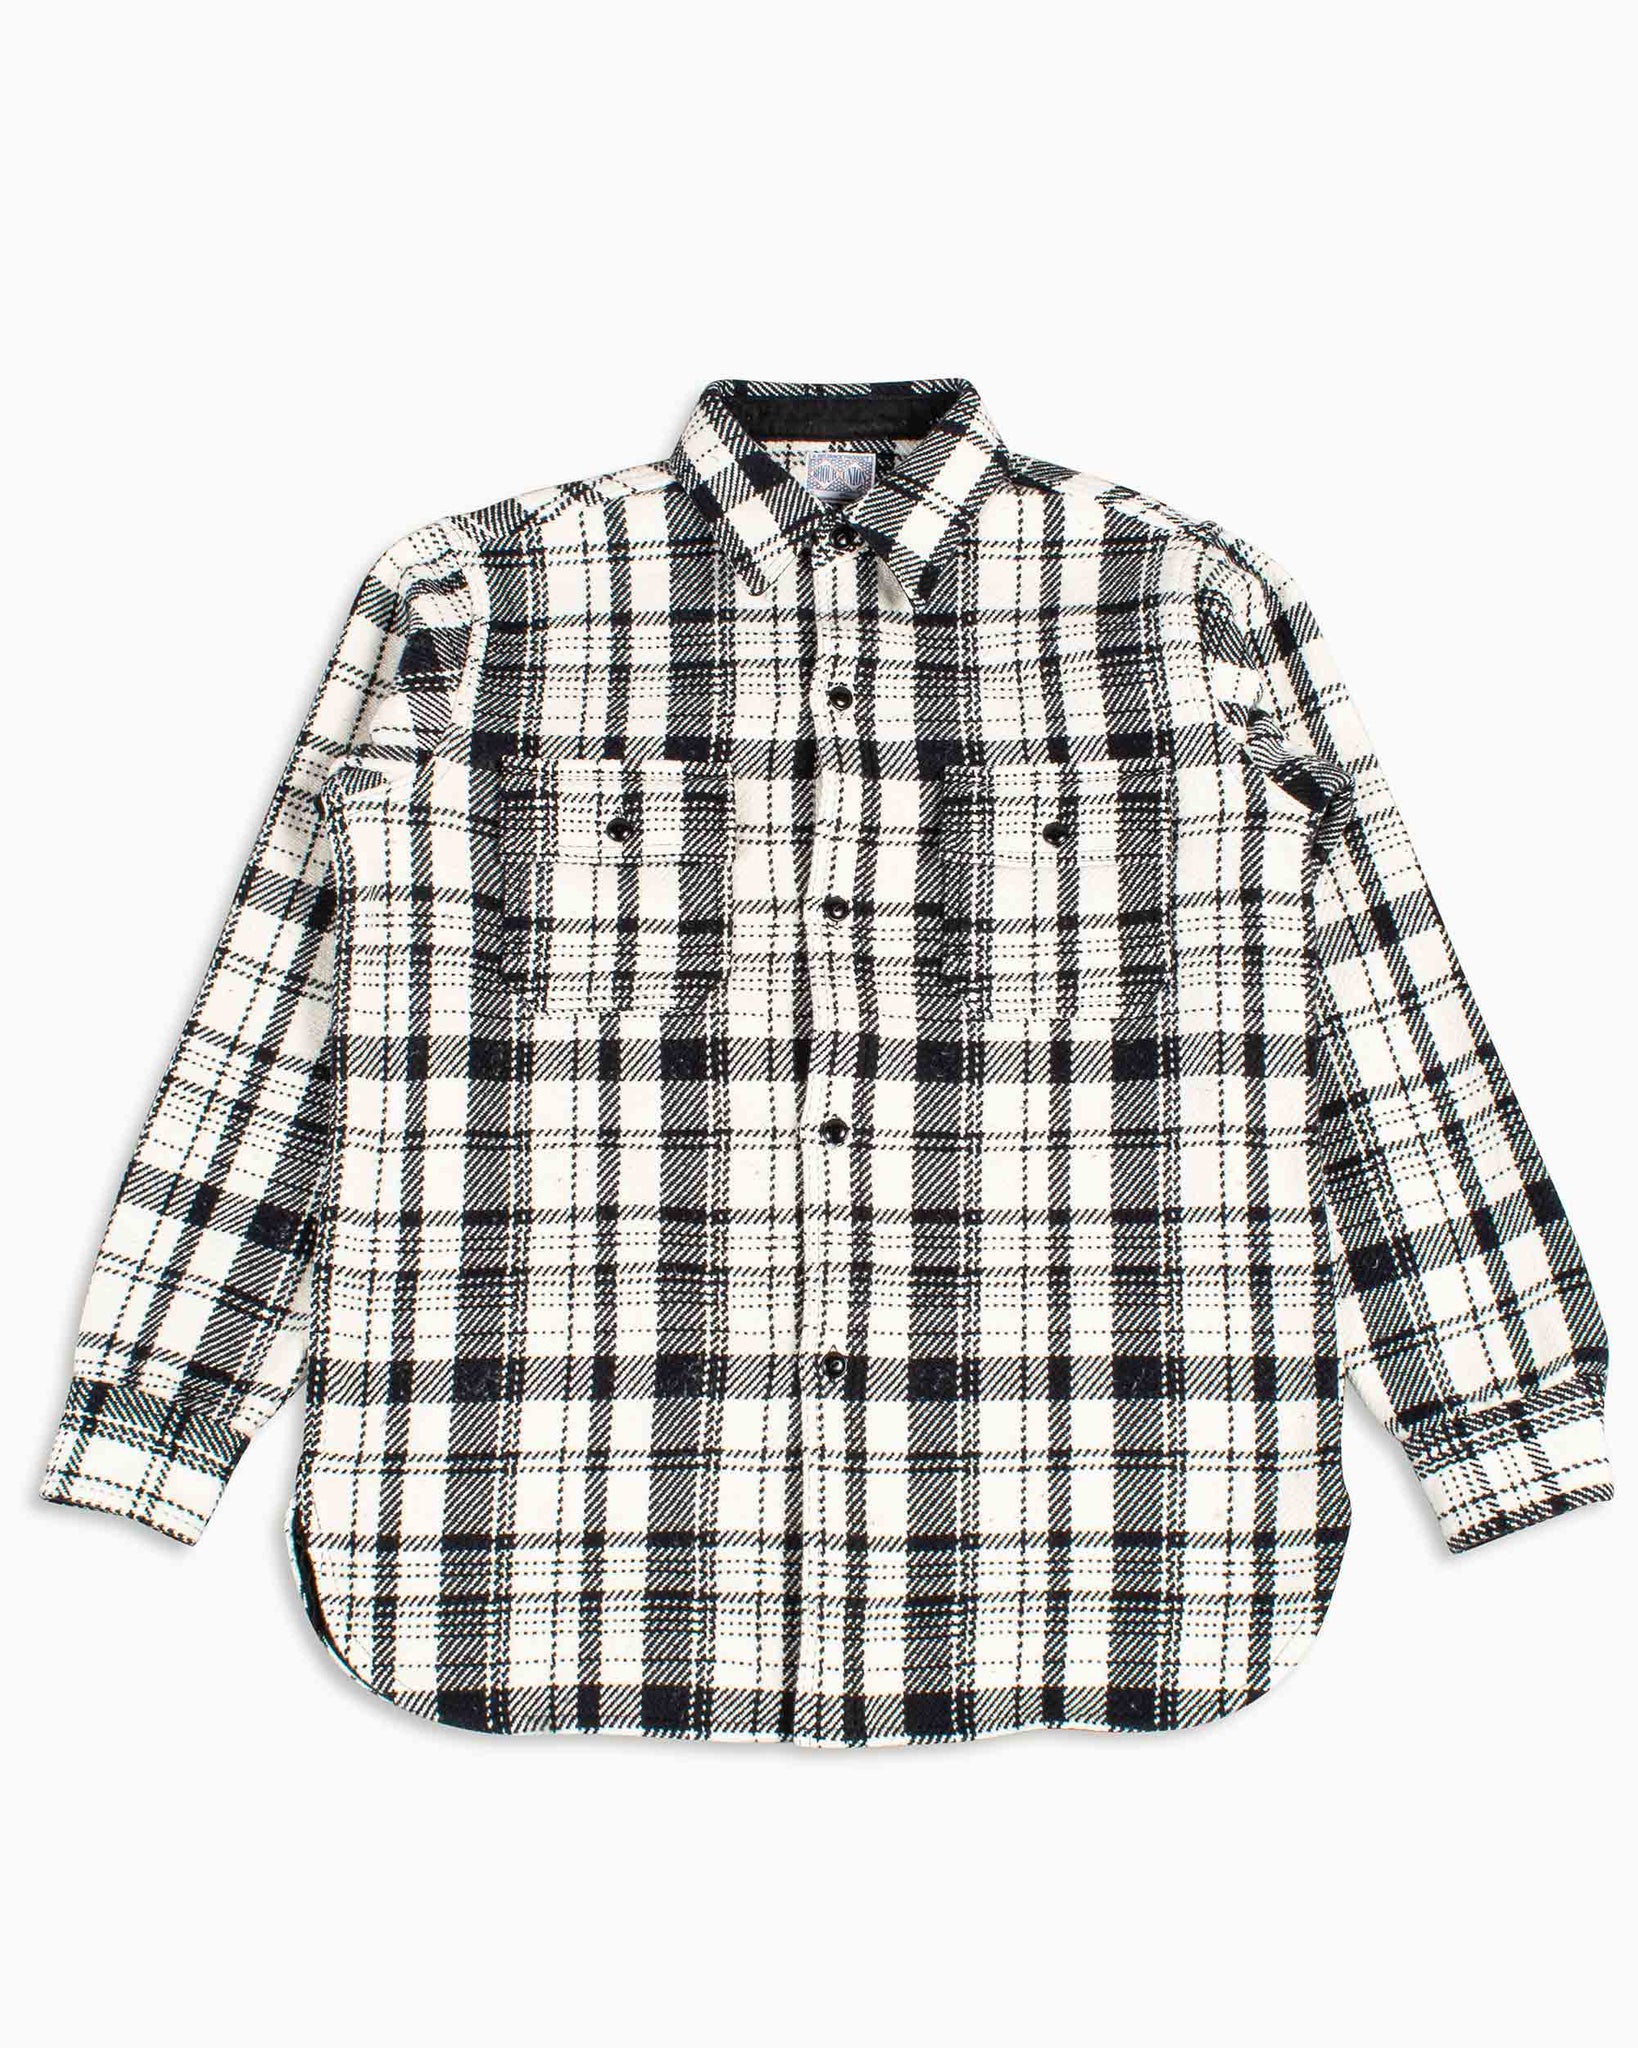 The Real McCoy's MS22101 8HU Heavy Weight Flannel Shirt White